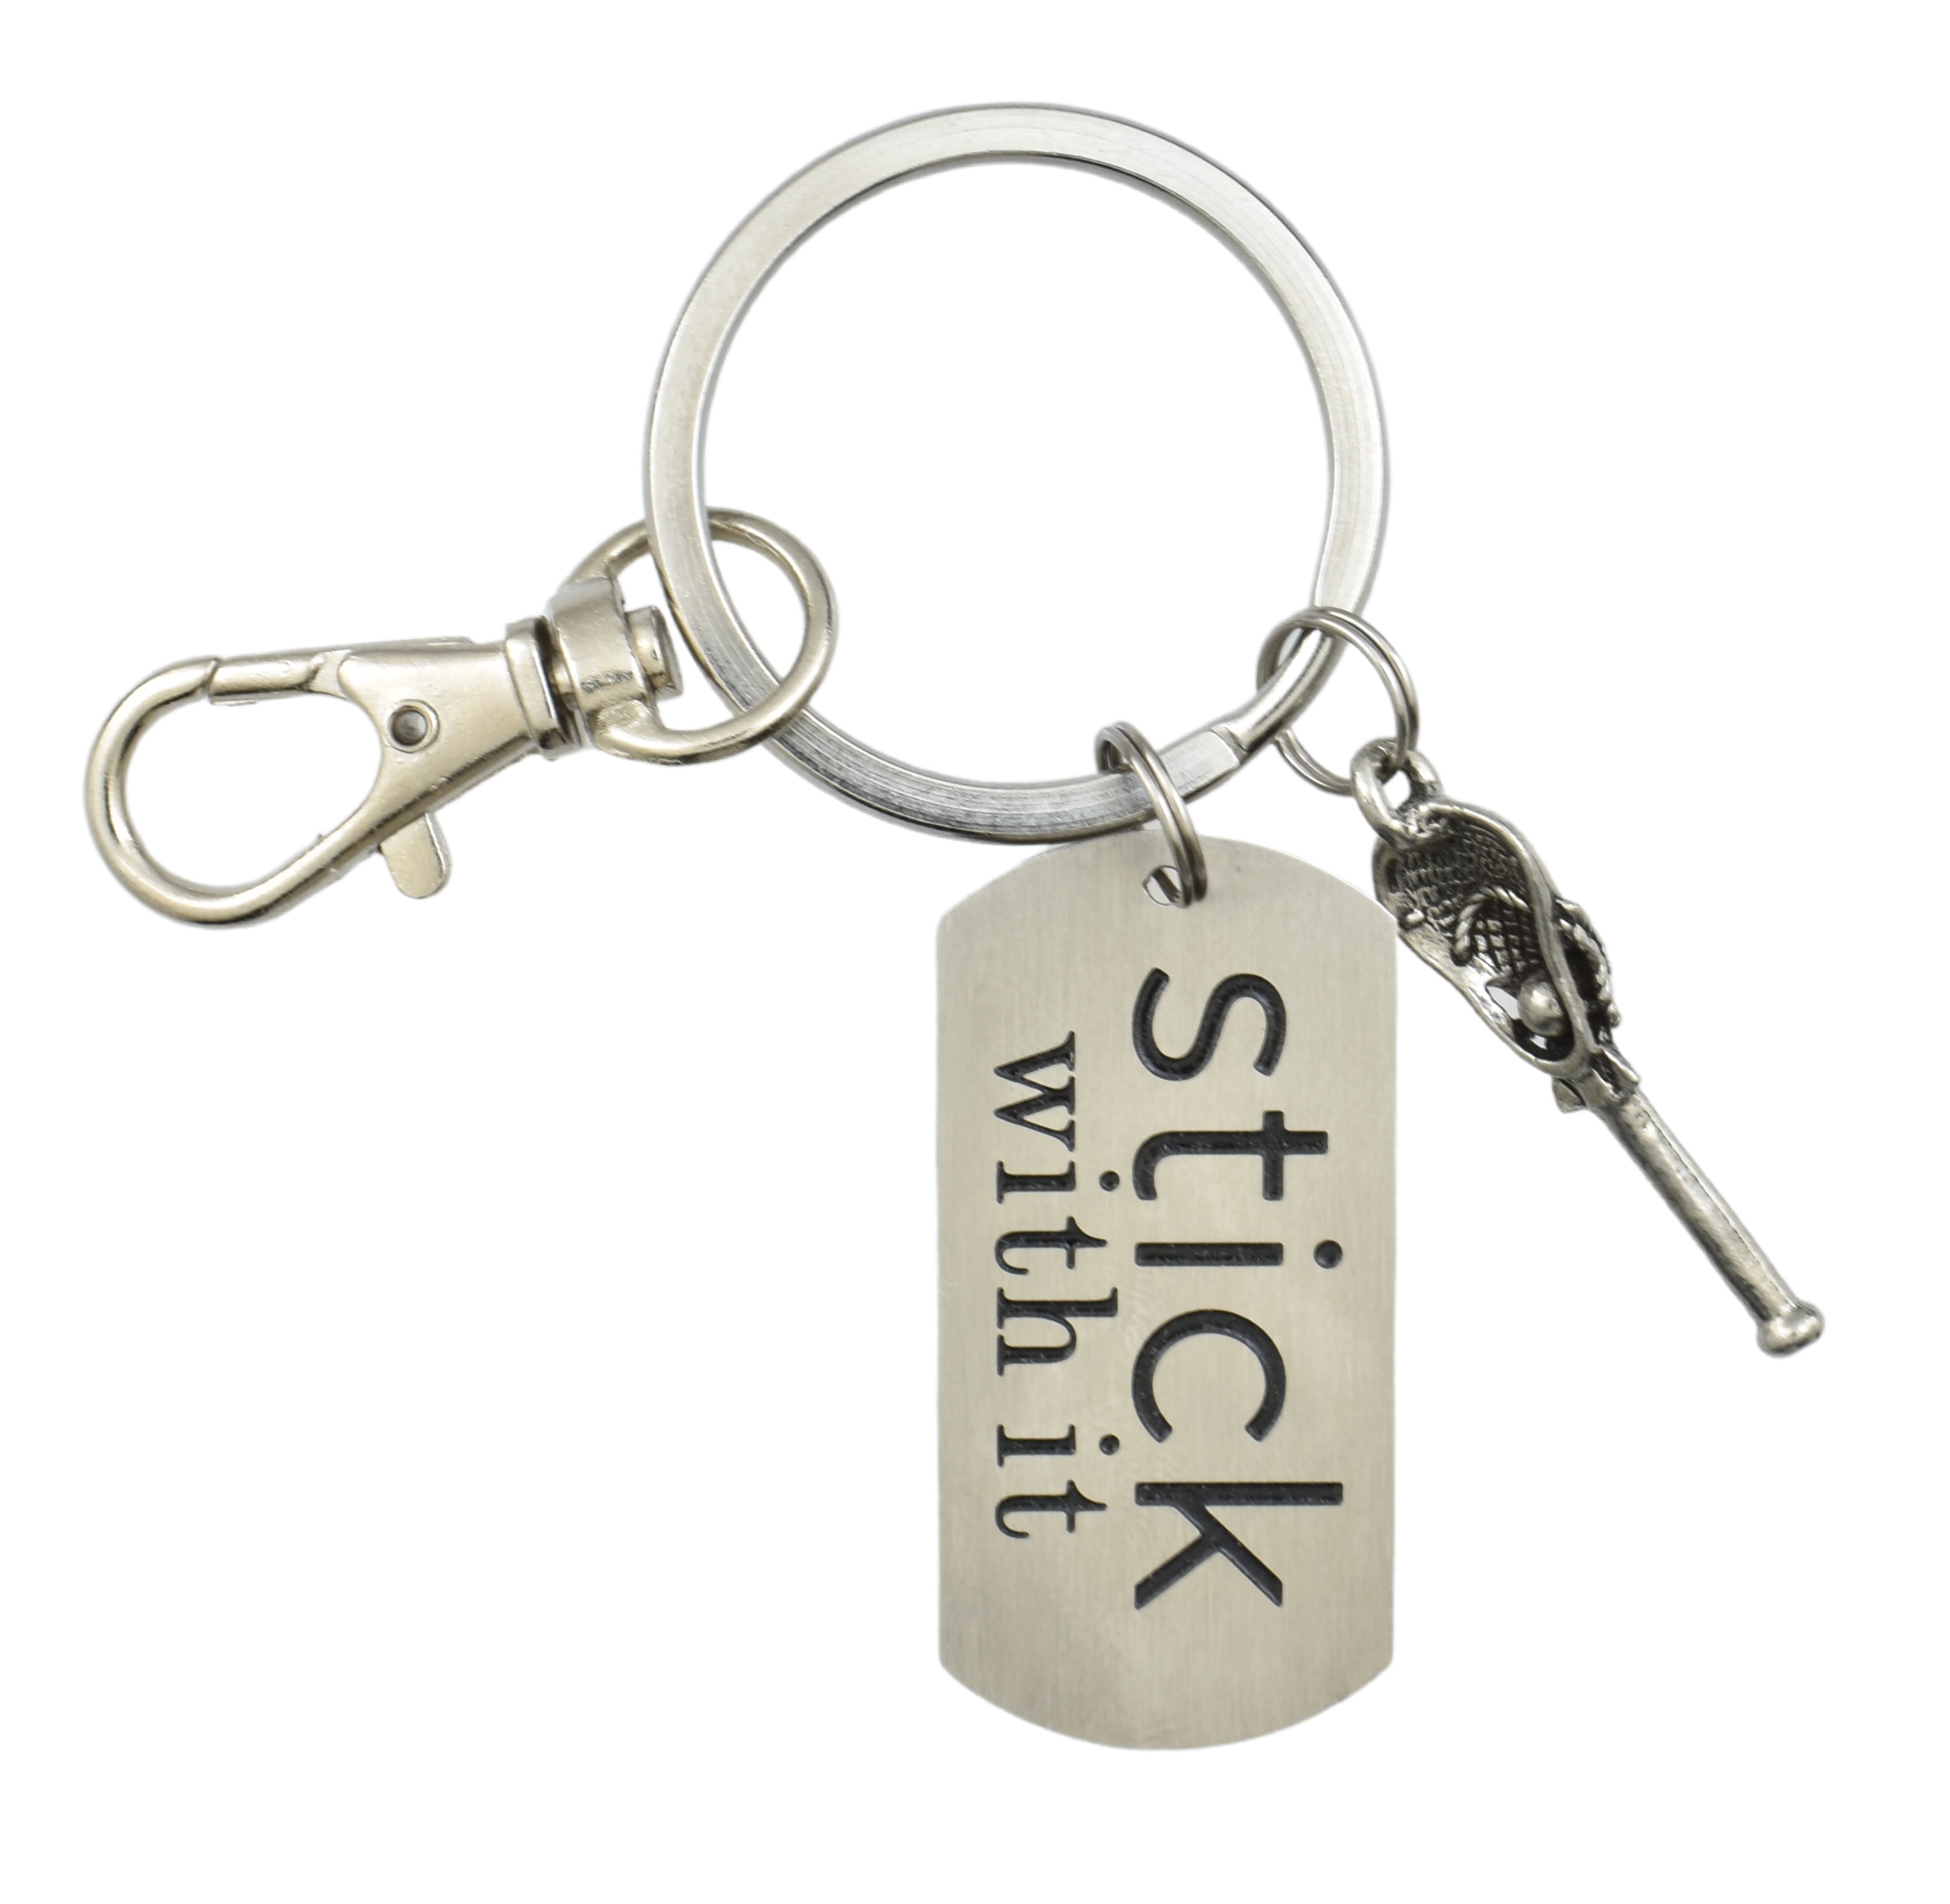 Bag or Purse Accessory Key Ring Pattern and Word Options Personalised Keychain Double Sided Design